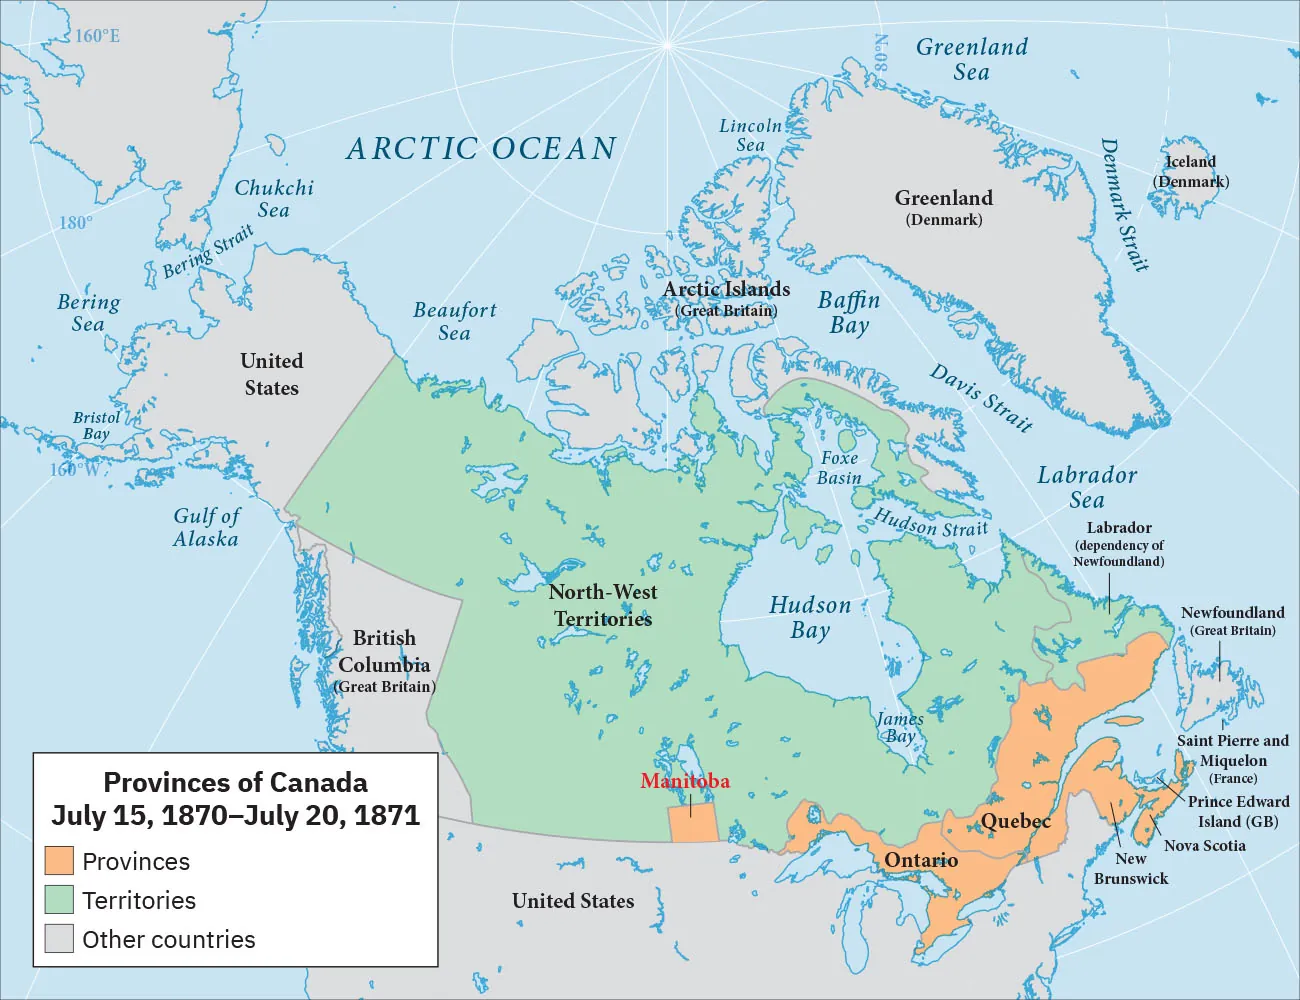 A map of the Arctic Ocean, Canada, Greenland, and the top portion of the United States is shown. A legend is labeled “Provinces of Canada; July 15, 1870–July 20, 1871.” On the legend, the color orange indicates “Provinces,” green indicates “Territories,” and gray indicates “Other countries.” Most of Canada (except for a rectangular portion in the southwest labelled “British Columbia (Great Britain)), is highlighted green and labeled “North-West Territories.” A square section at the bottom middle of Canada labeled “Manitoba” is highlighted orange as well as a long section along the bottom of Canada on the southeastern edge, including places labeled “Ontario, Quebec, New Brunswick, Nova Scotia, Prince Edward Island (GB), and Saint Pierre and Miquelon (France).” All the other lands shown are highlighted gray.